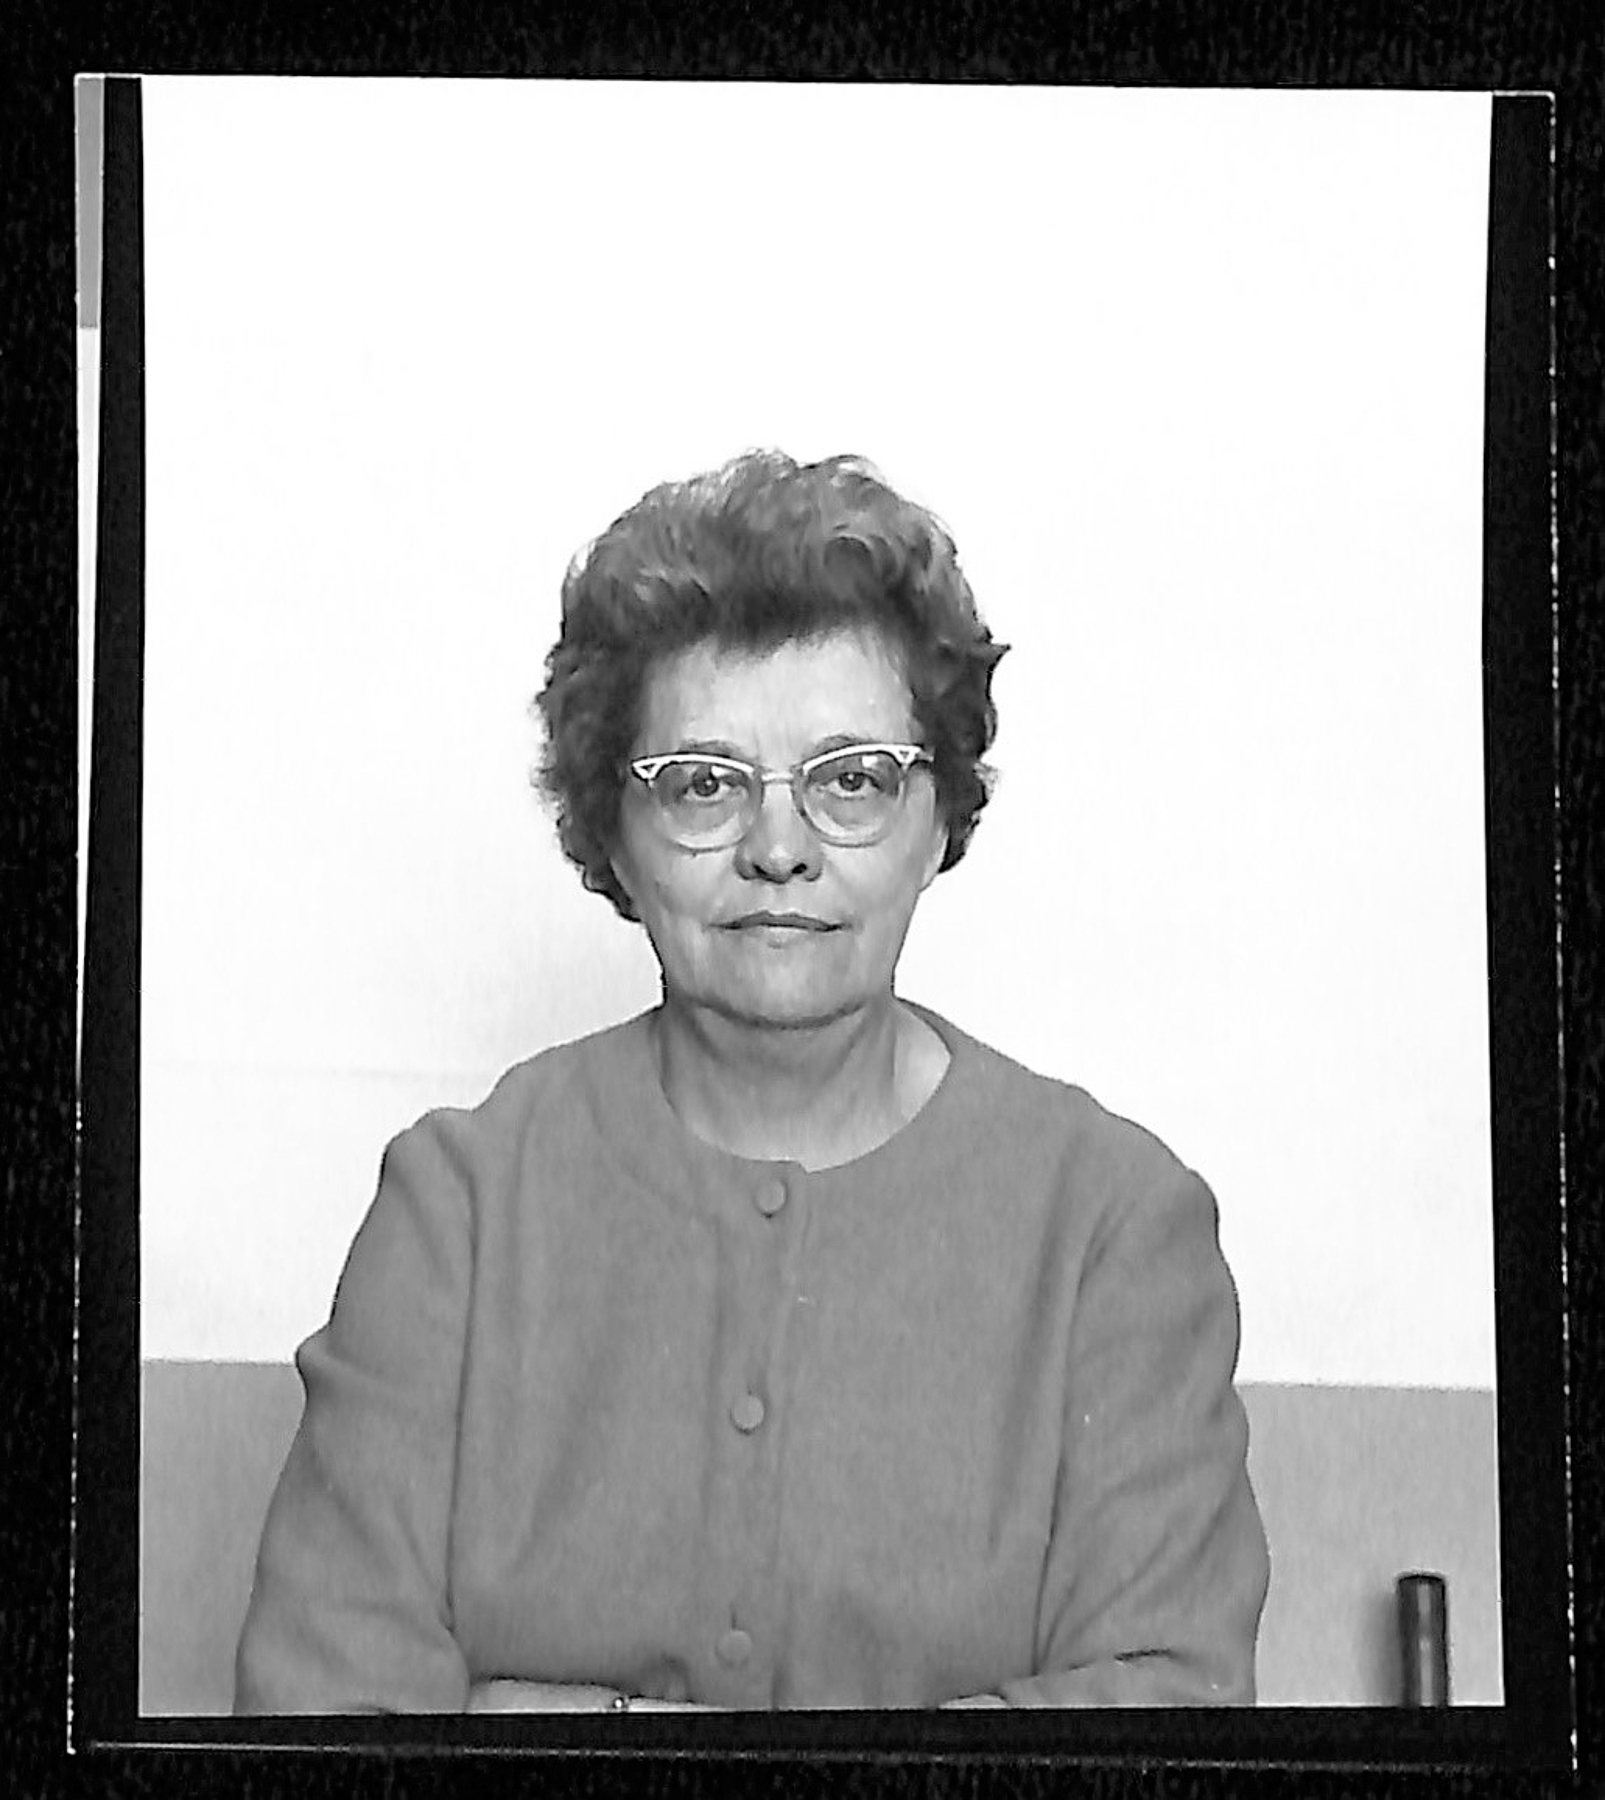 Image of Julena Steinheider Duncombe during her time working at the USNO. 